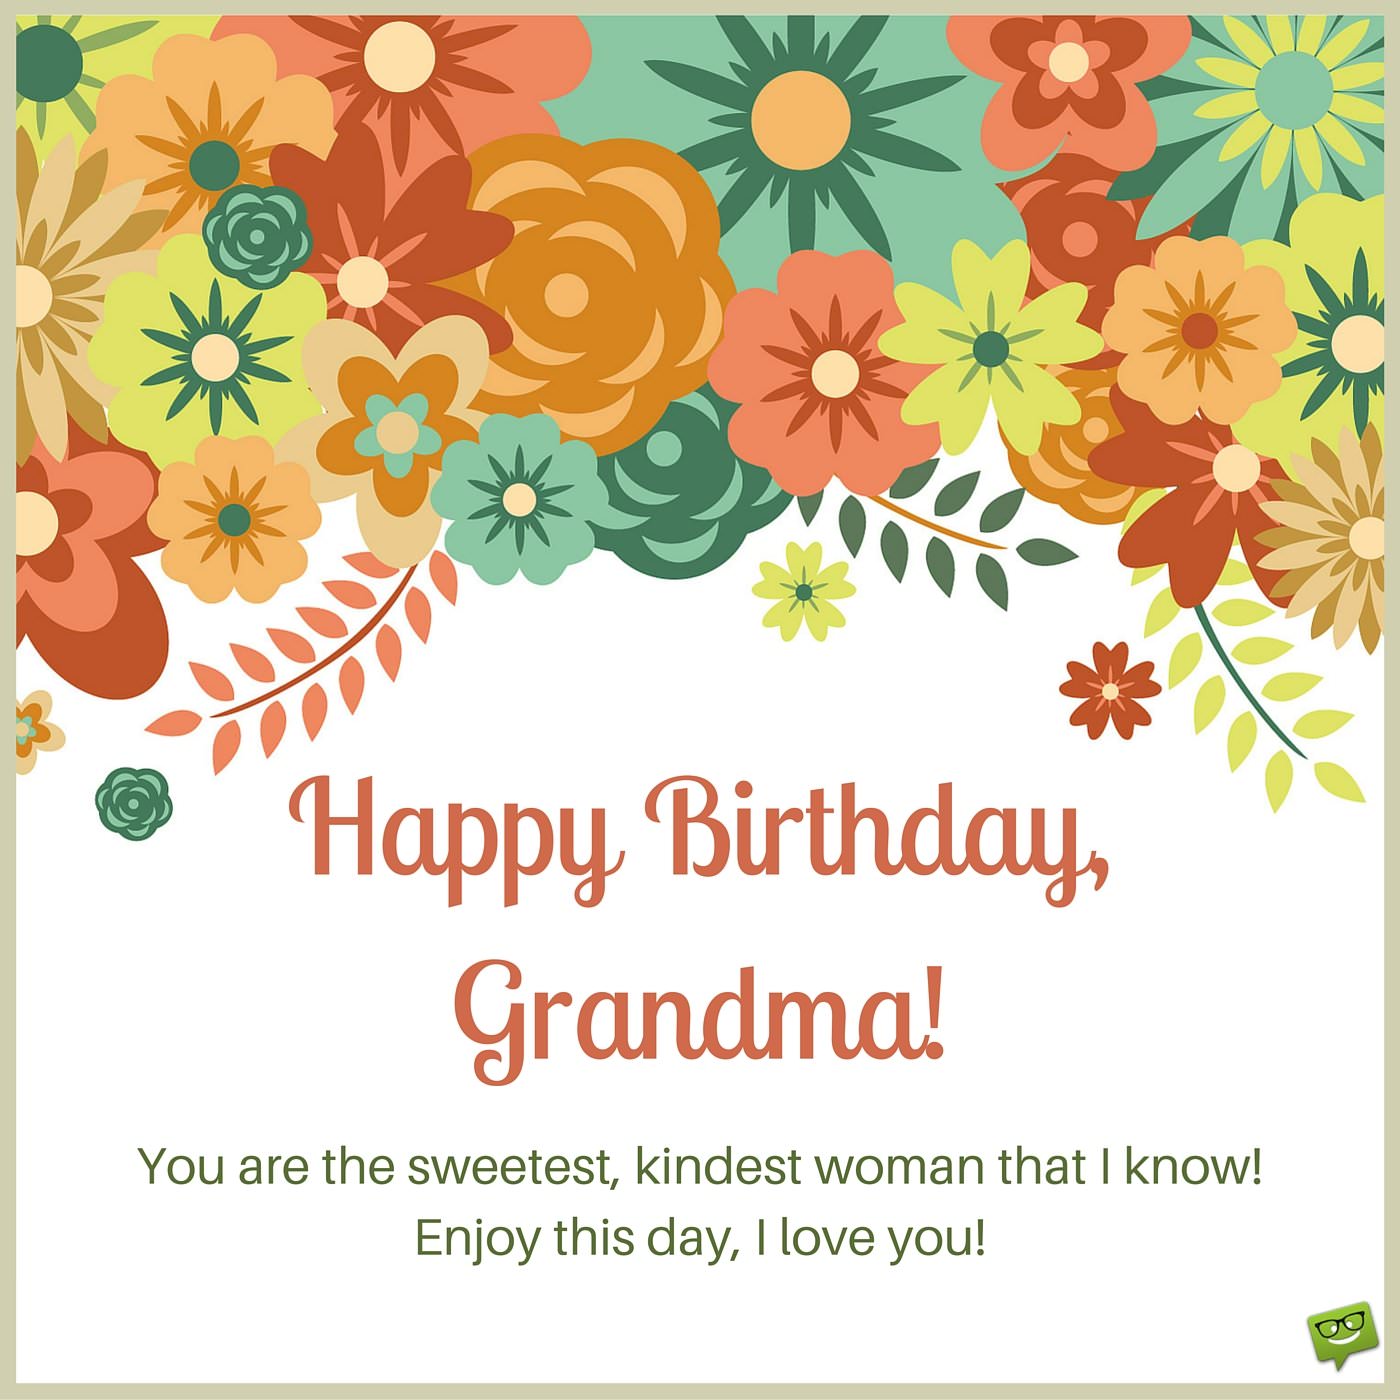 70 Touching Birthday Wishes for Grandma #39 s Special Day